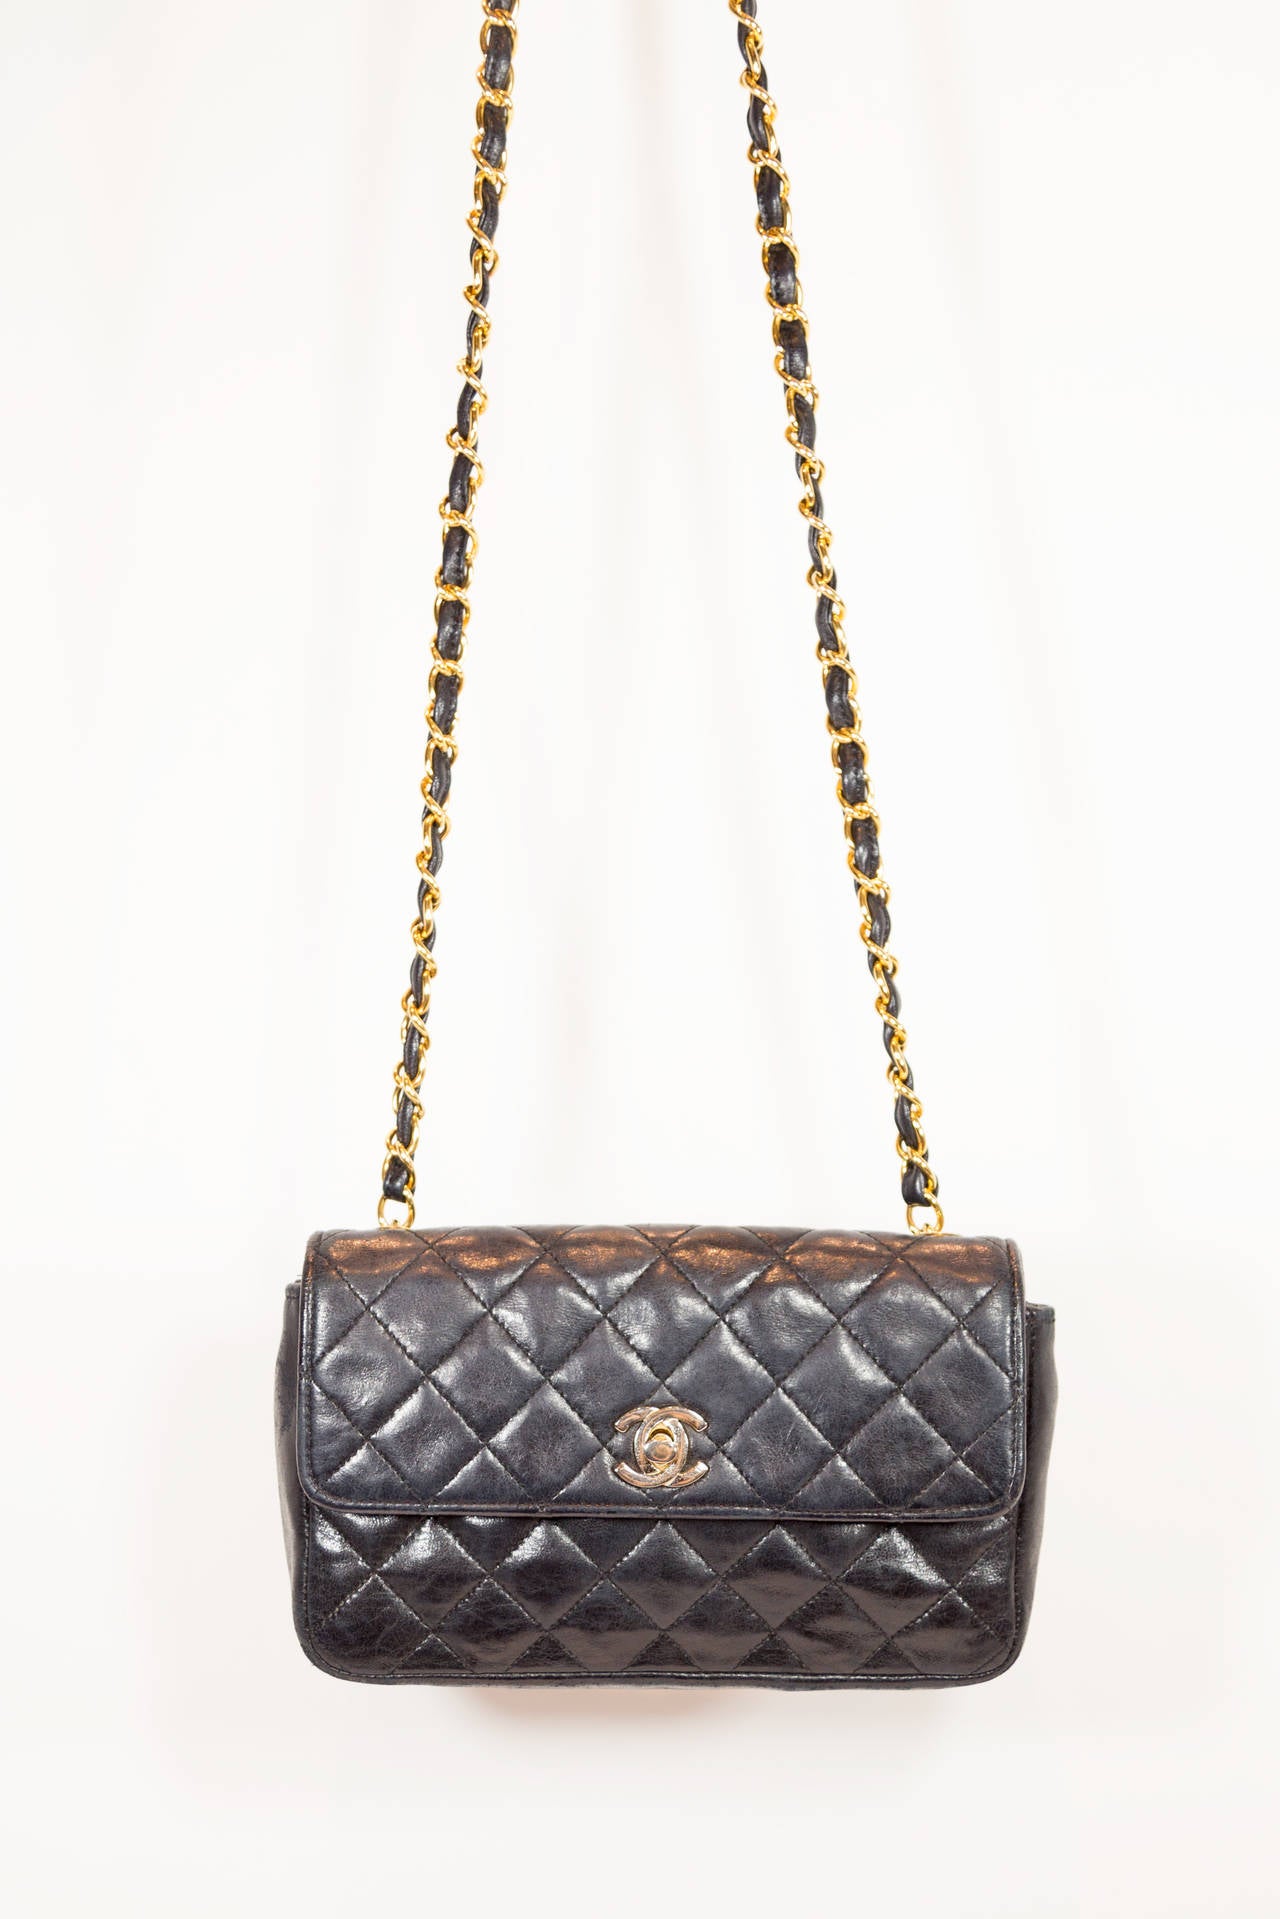 Chanel Vintage Black Quilted Cross Body Bag at 1stdibs